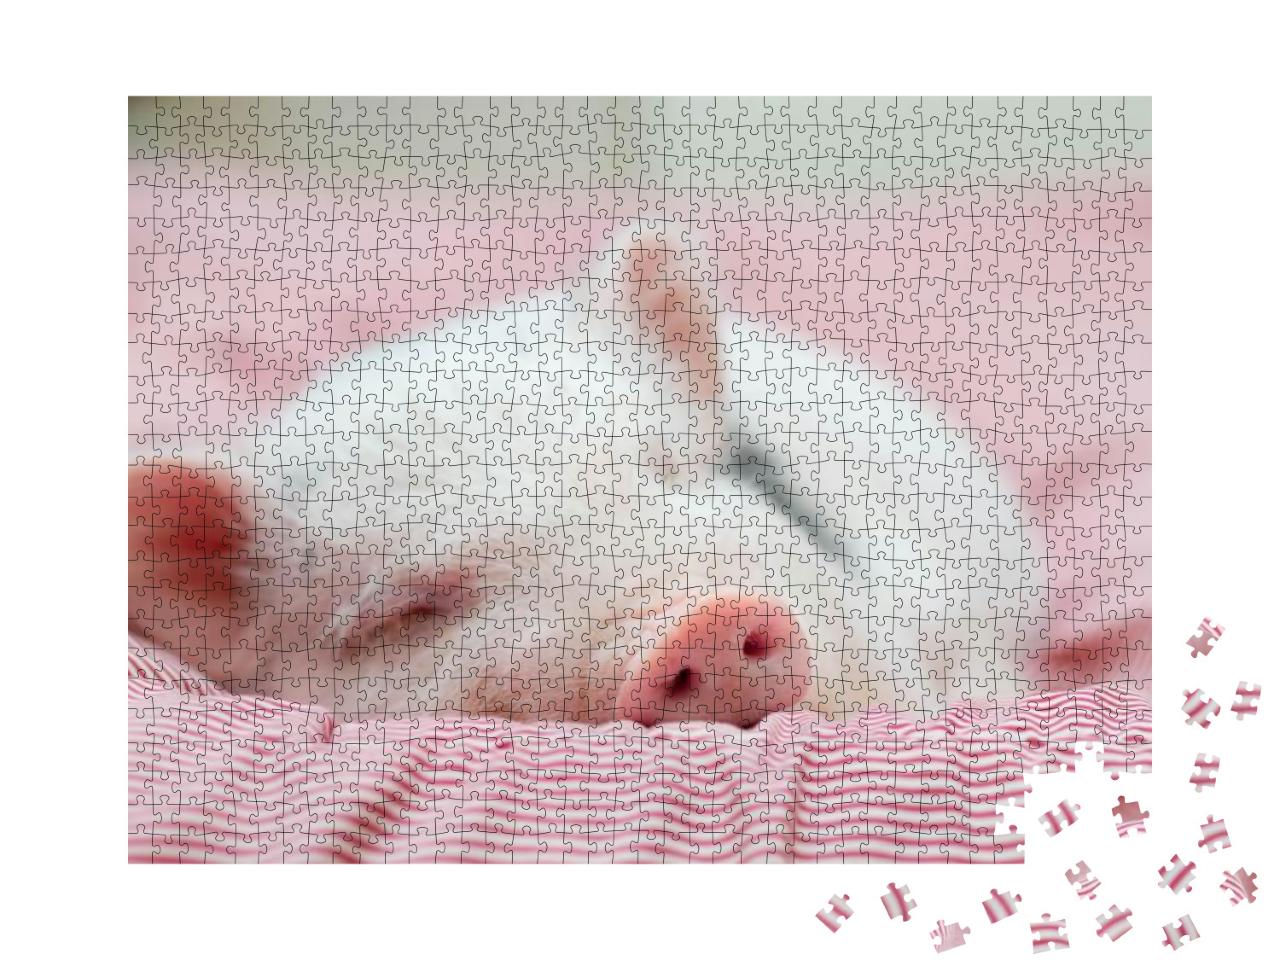 Cute Pig Sleeps on a Striped Blanket. Christmas Pig... Jigsaw Puzzle with 1000 pieces